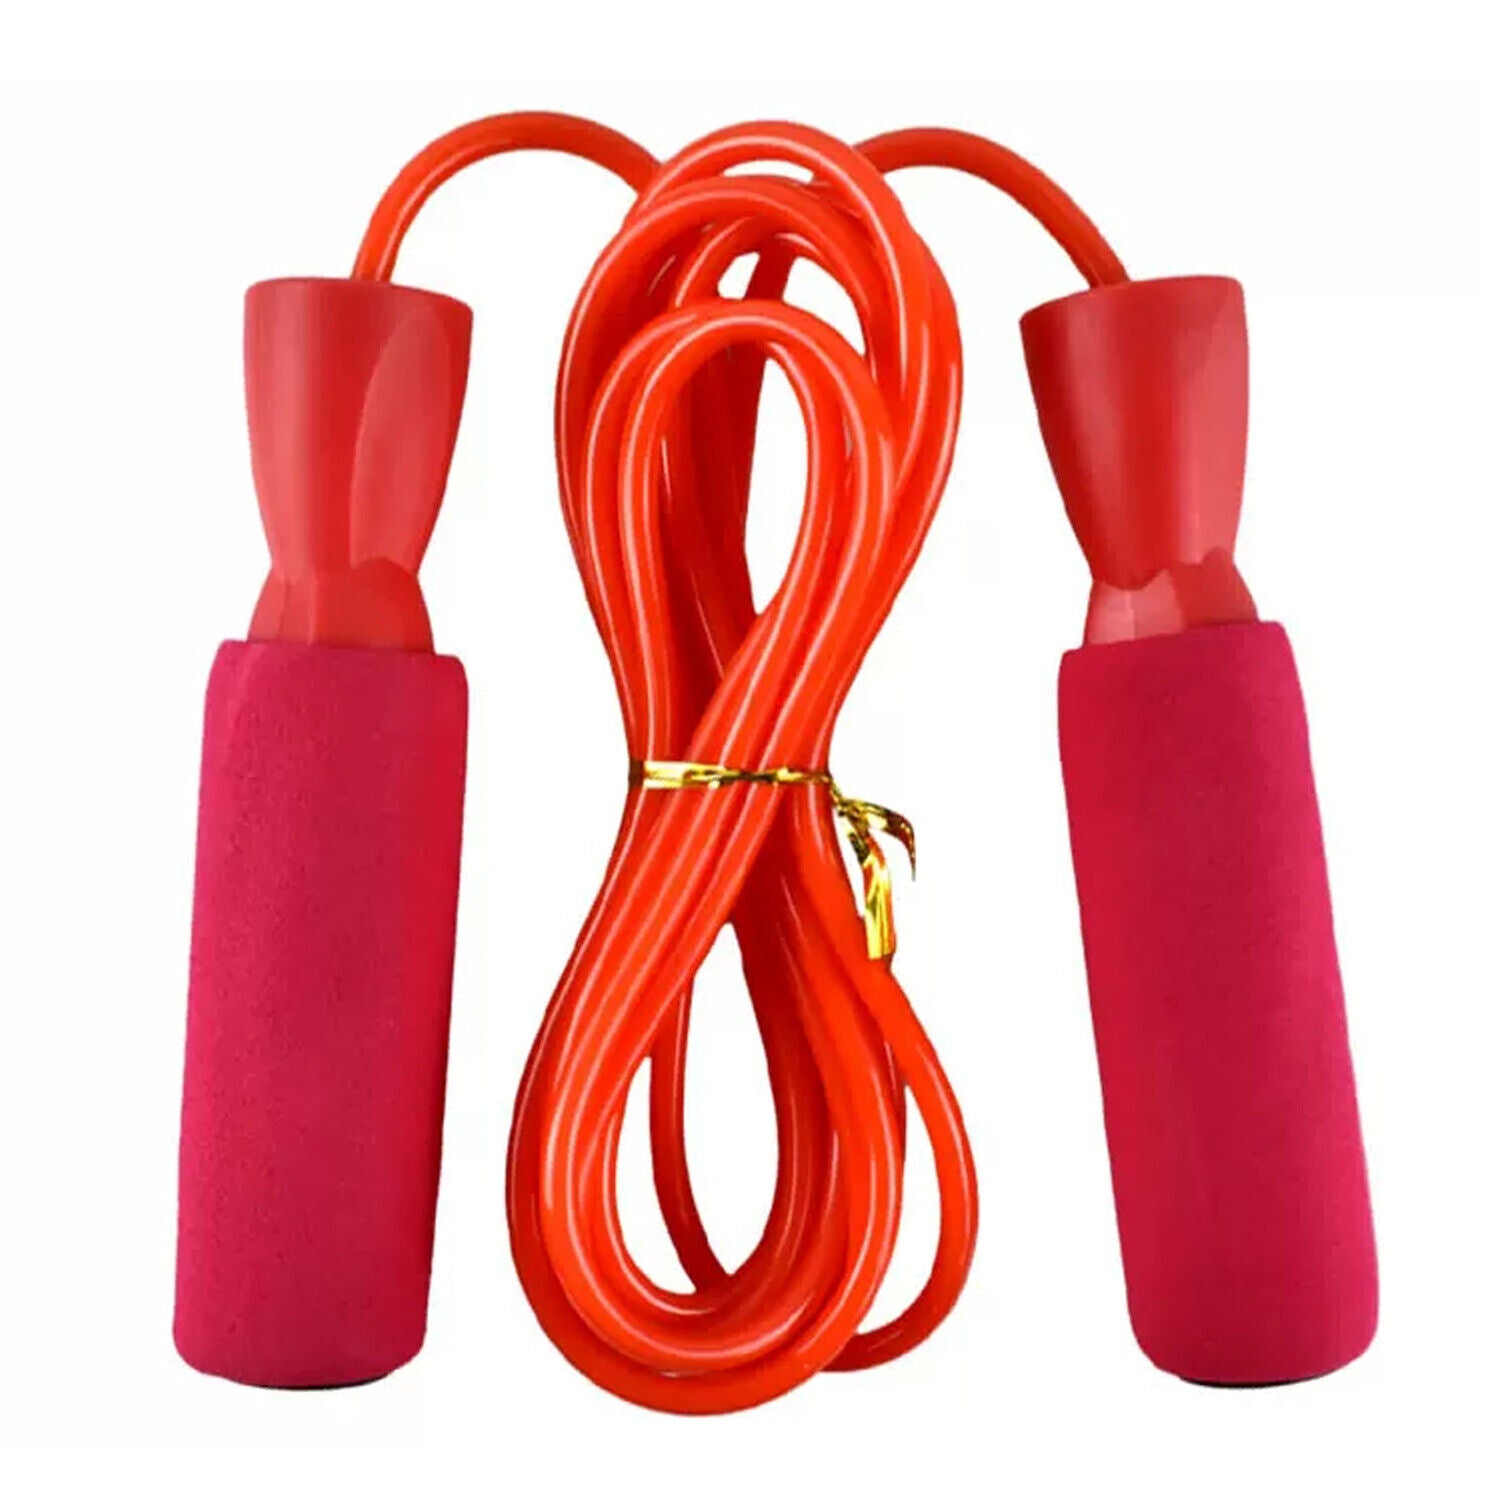 RED-SKIPPING-ROPE